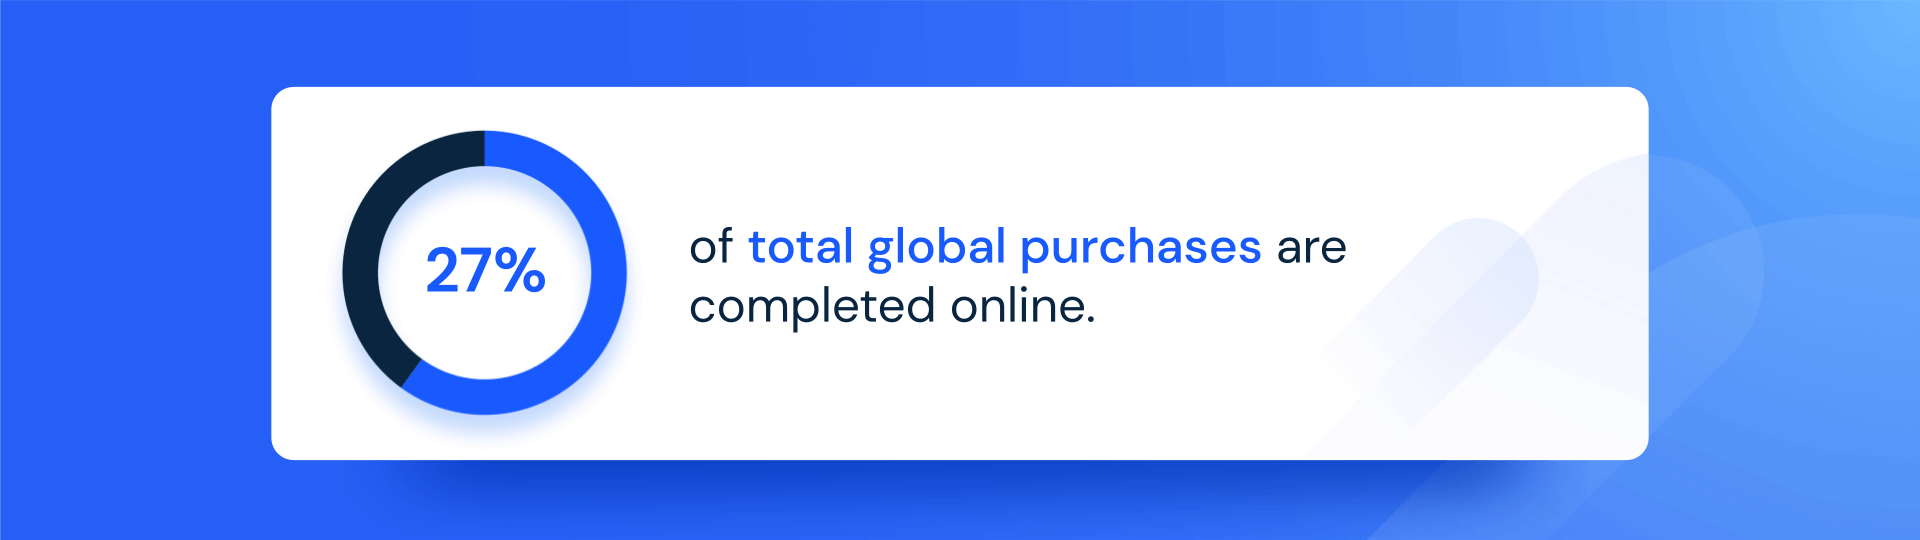 27% of total global purchases are completed online representing keyword mapping